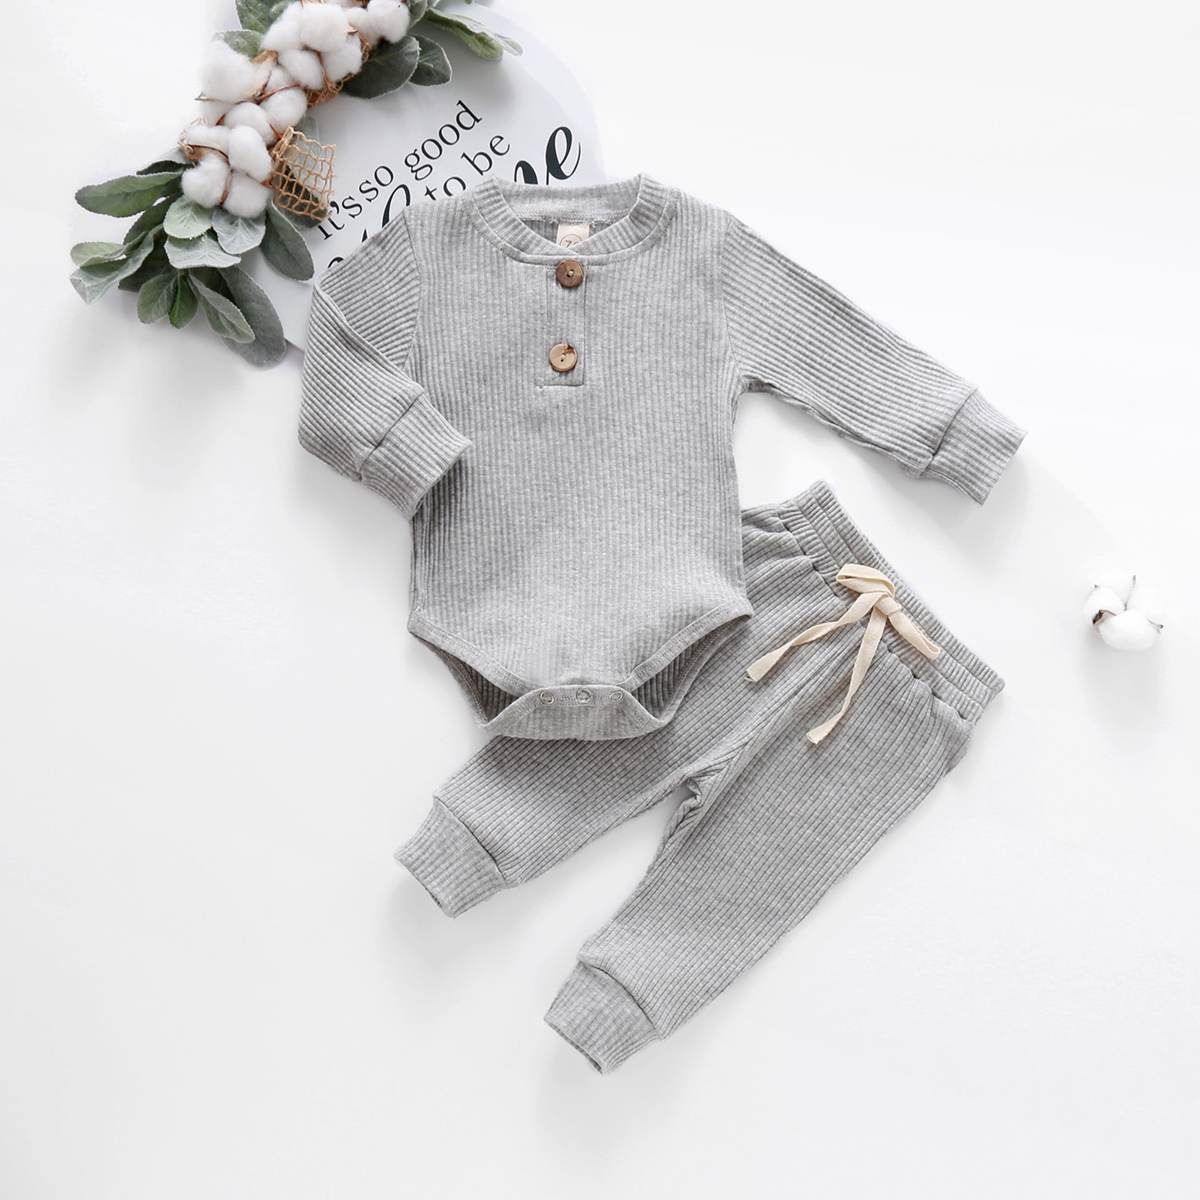 jaweiw Baby Girl Boy Fall Clothes 3 6 12 18 24 Months Outfits Long Sleeve Knitted Cotton Romper Pants Infant Winter Sets - image 4 of 9